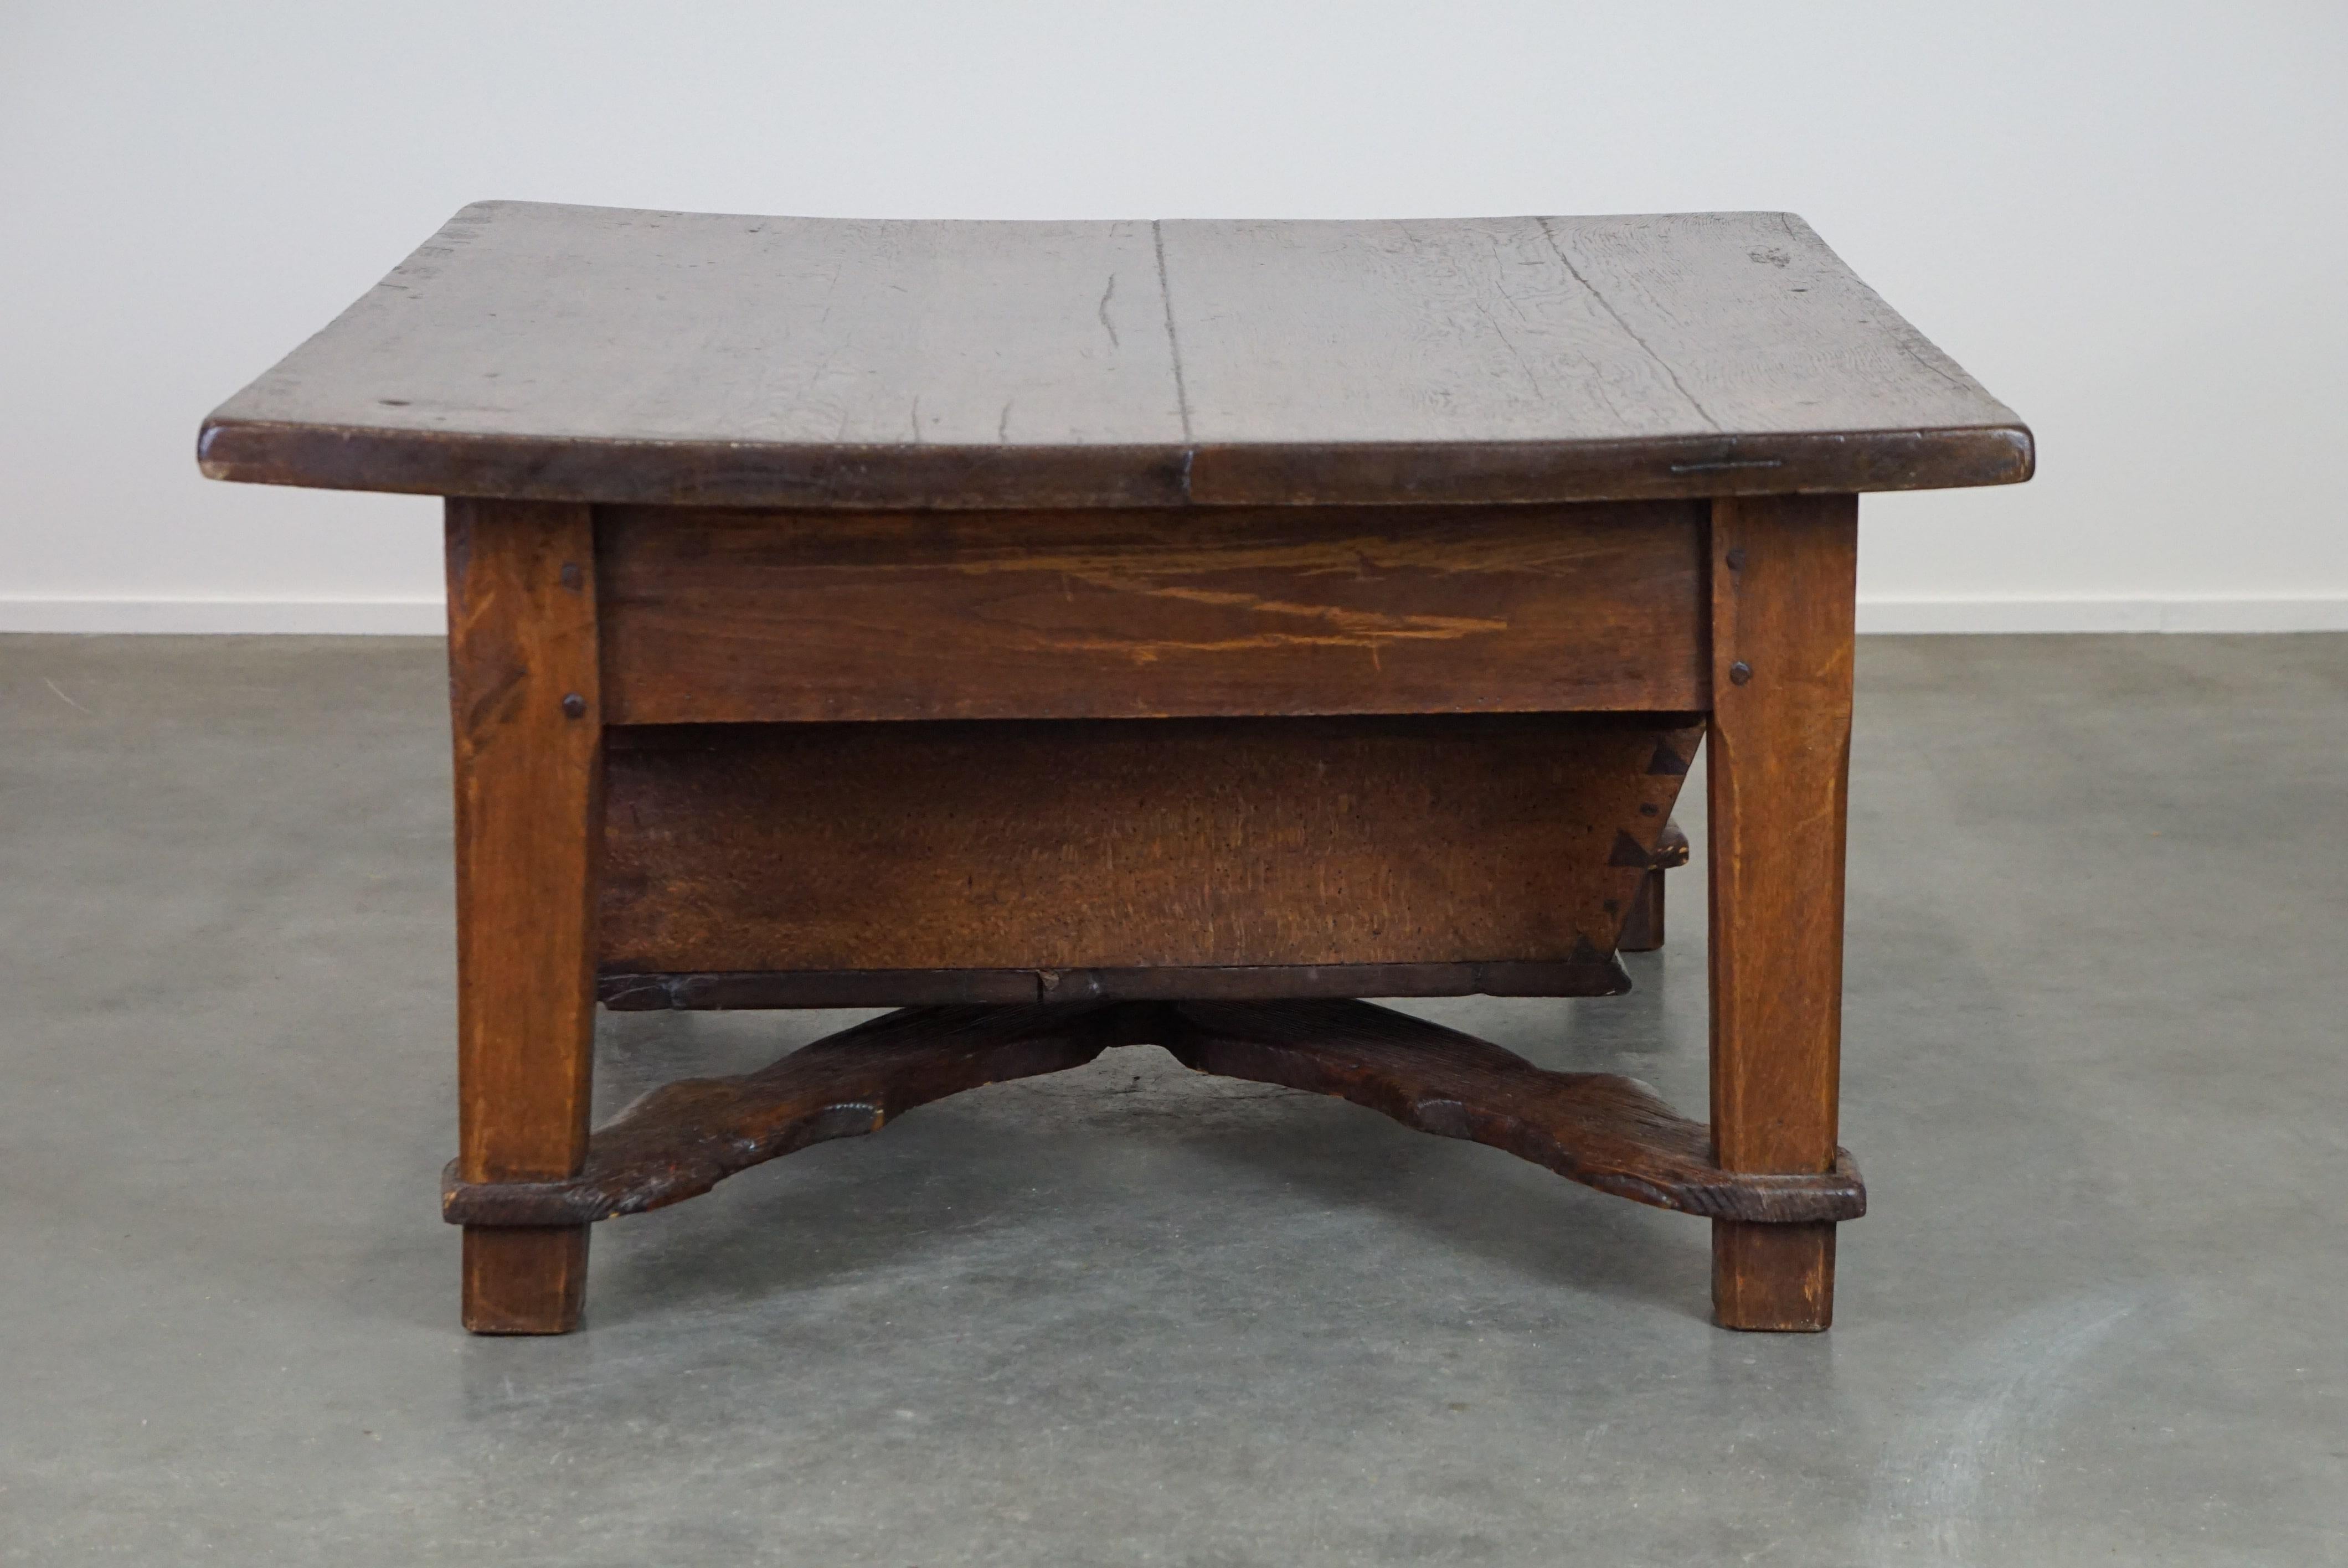 Late 18th-century Spanish coffee table with deep drawer and a beautiful patina In Fair Condition For Sale In Harderwijk, NL